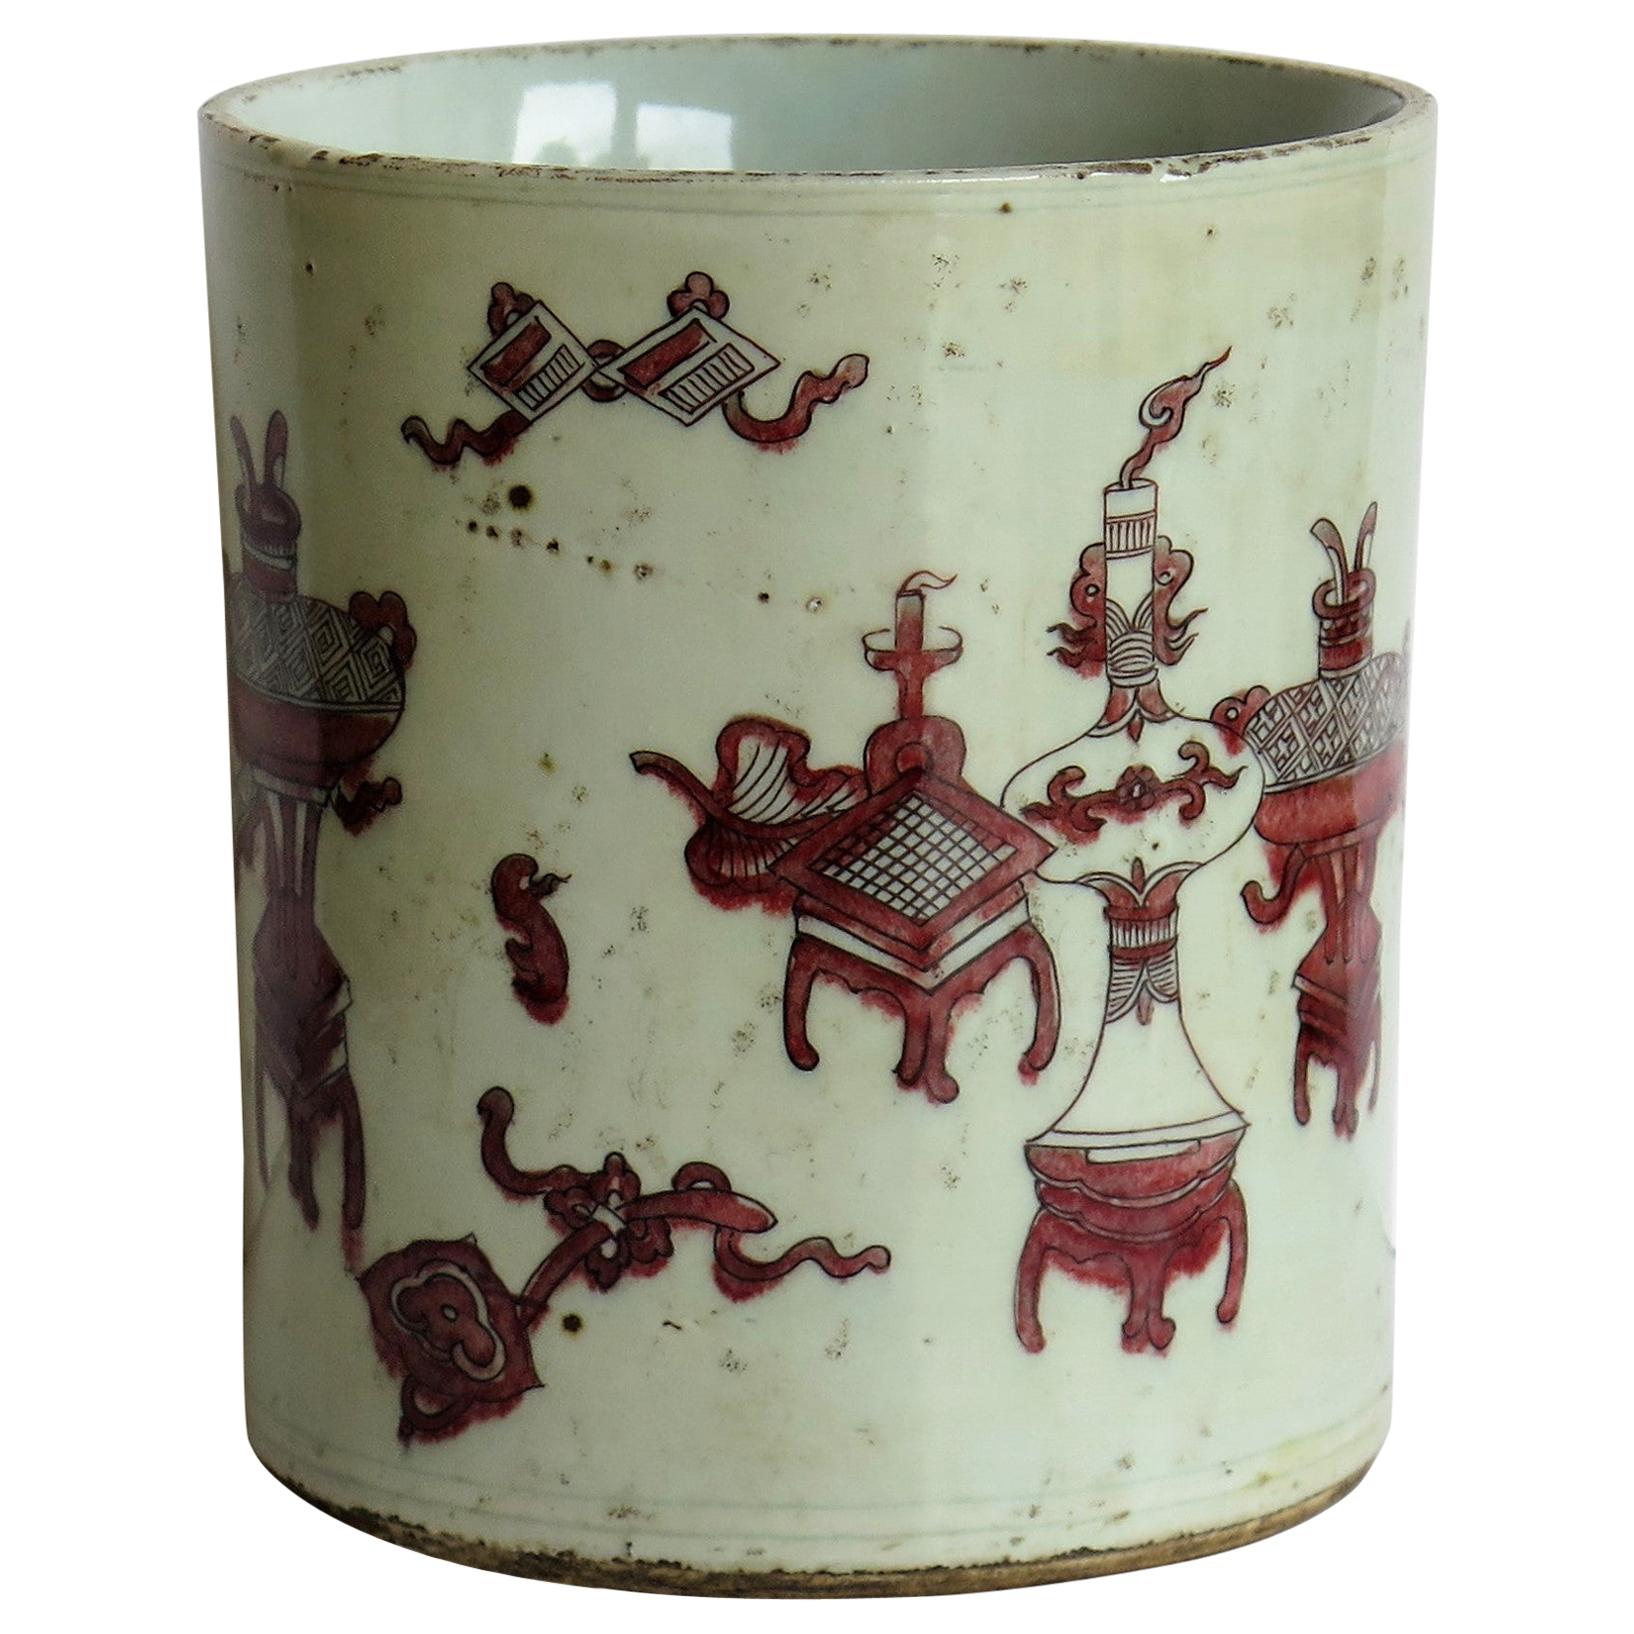 Chinese Porcelain Brush Pot Hand Painted in Under-Glaze Red, 18th Century Qing